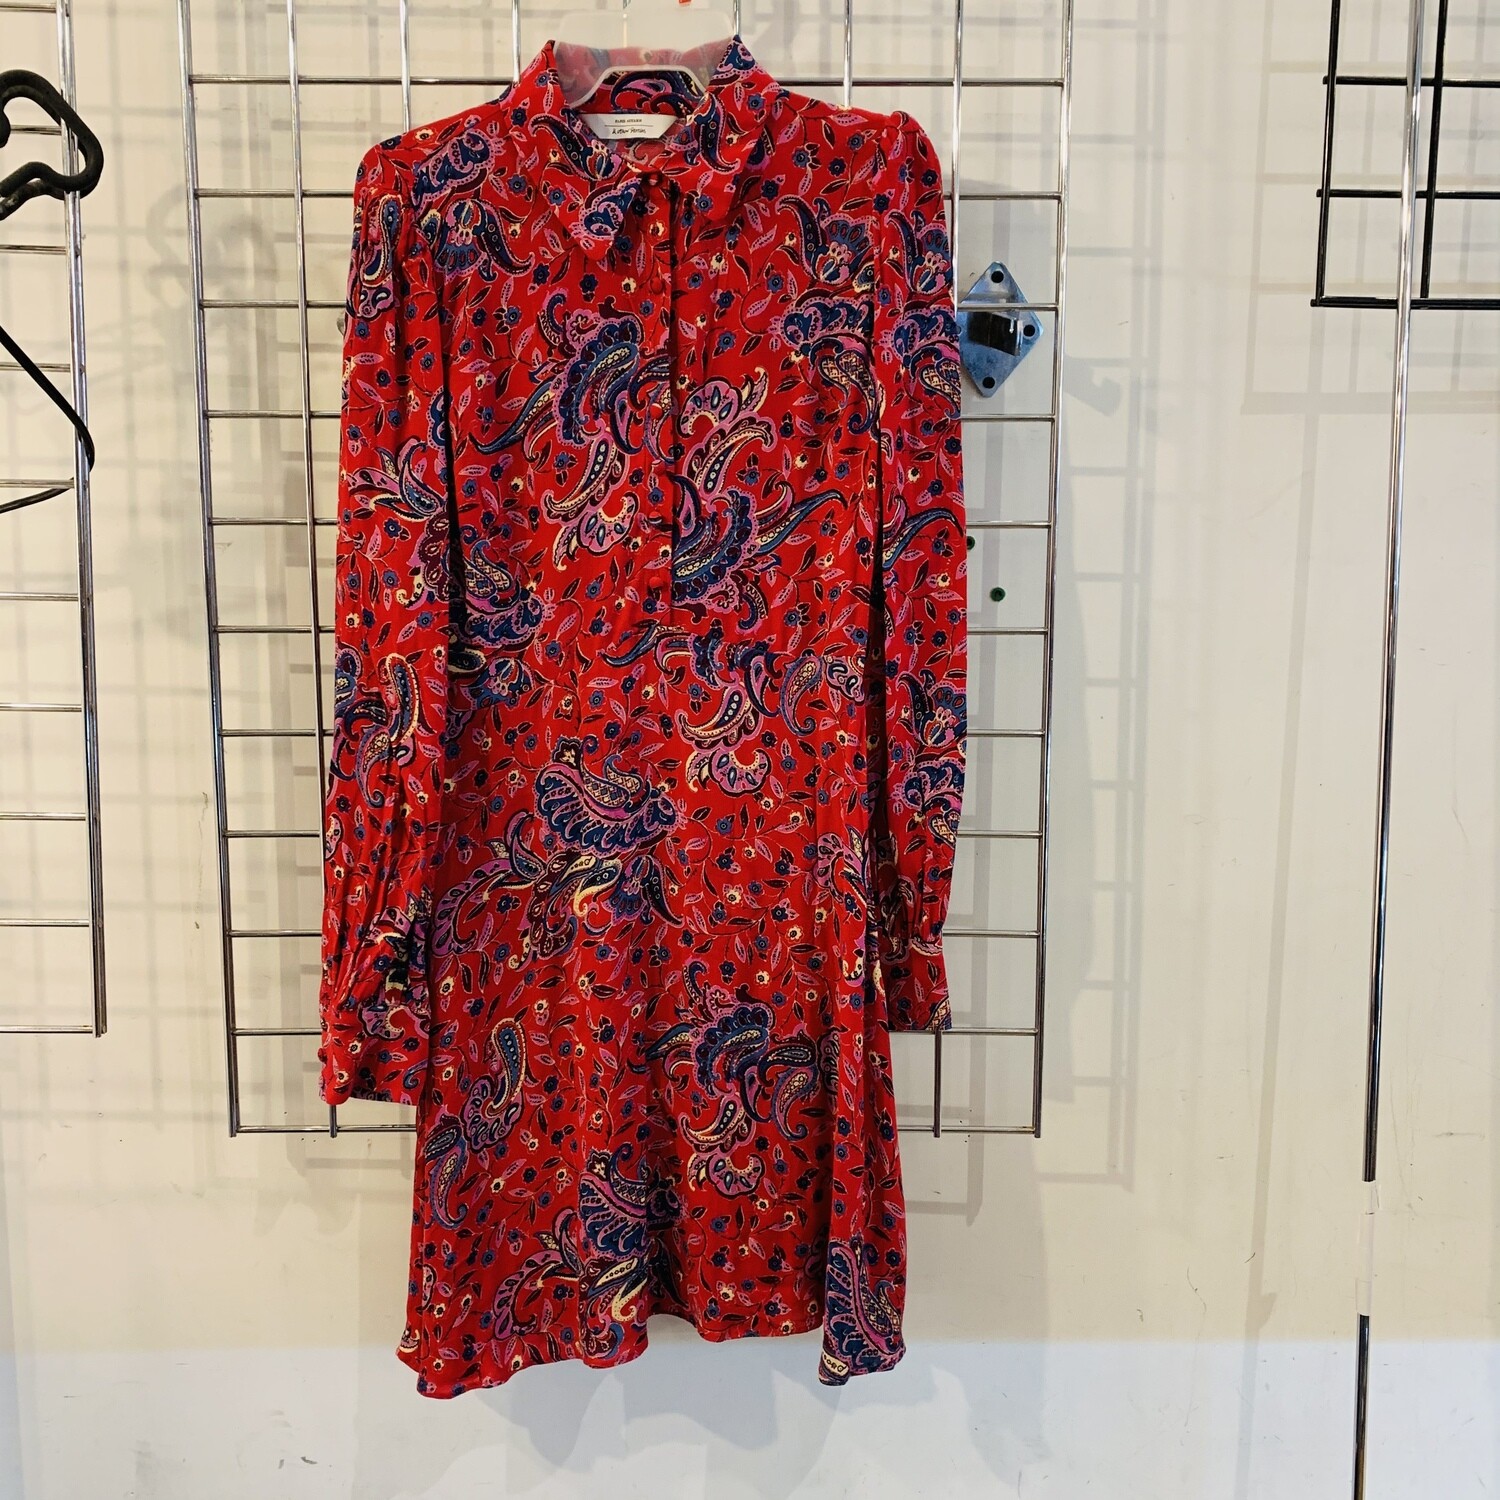 Size 4 & Other Stories Long-Sleeve Dress